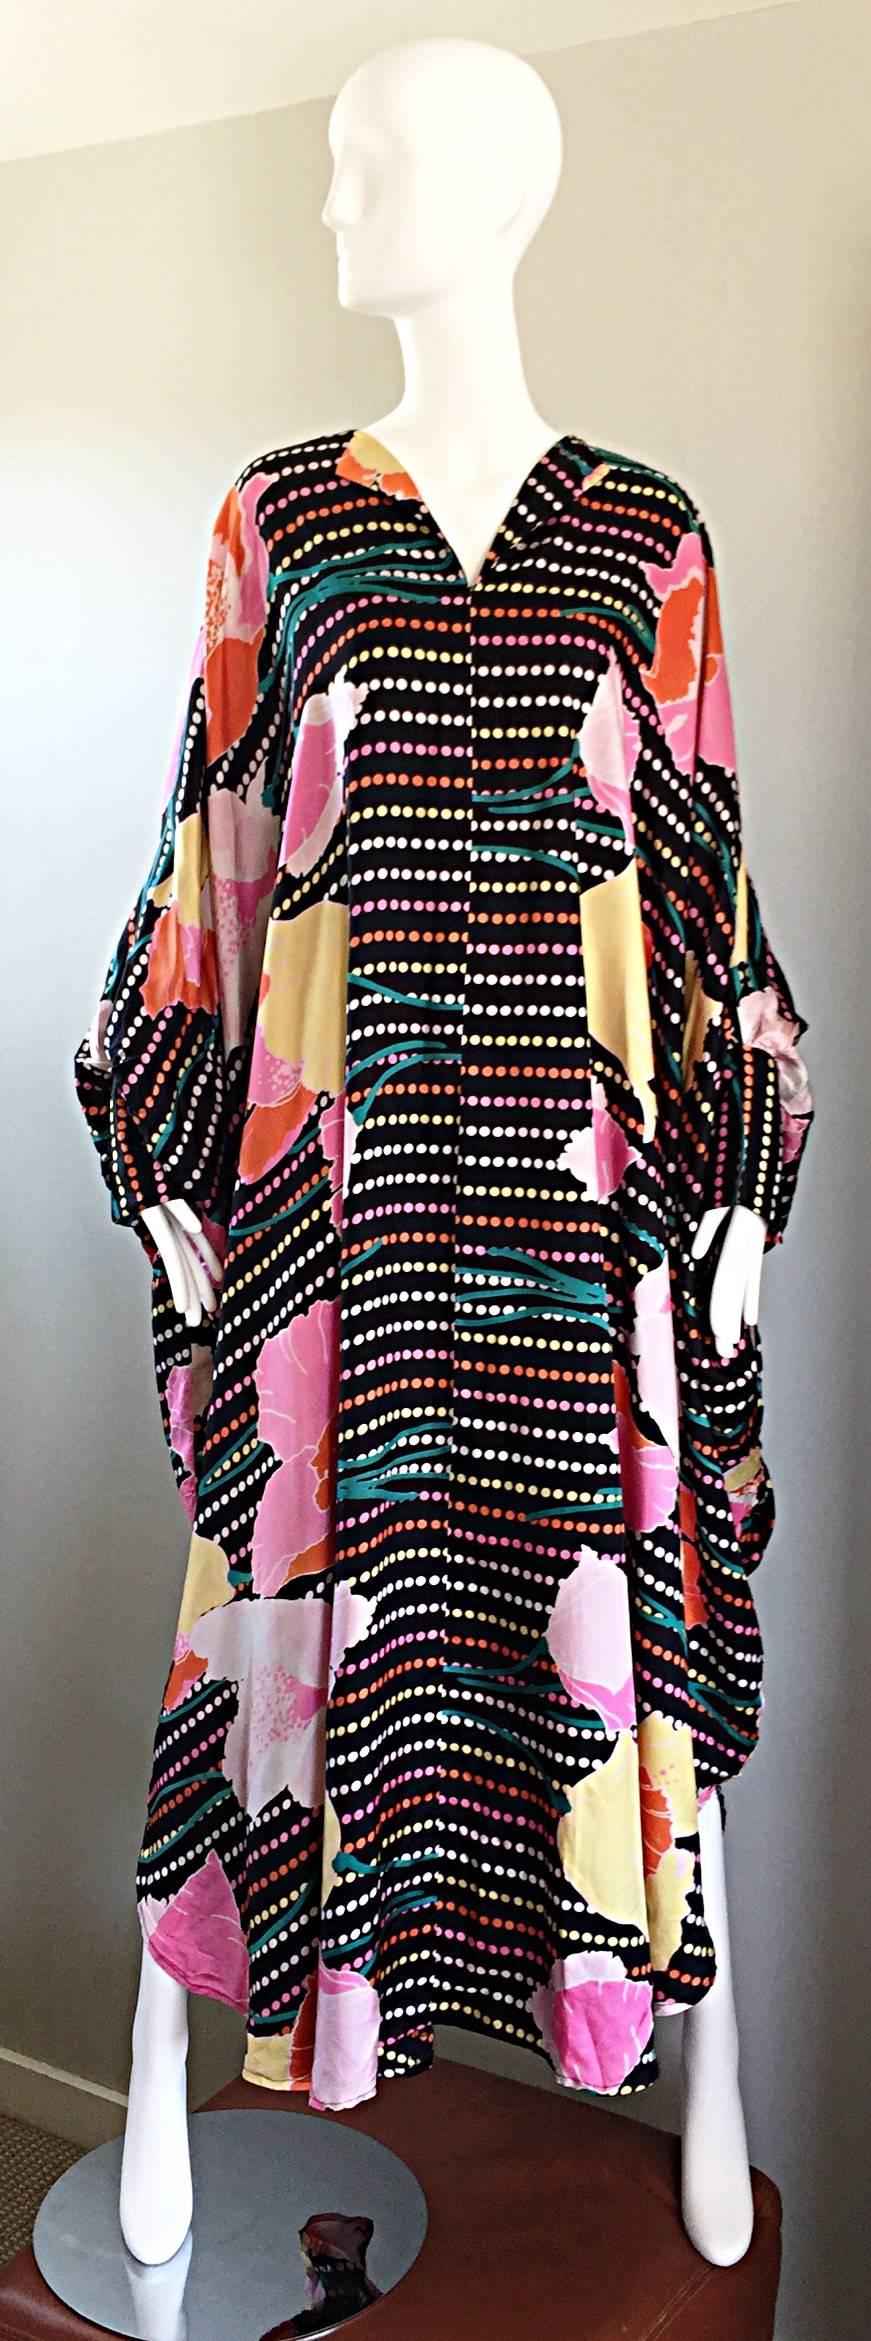 Incredible vintage 1970s LOIS MYERS polka dot and floral colorful kaftan maxi dress! Black backdrop with neon polka dots and abstract flowers throughout. Cuff at each sleeve hem. The perfect statement piece! Great for beachwear, the pool, running